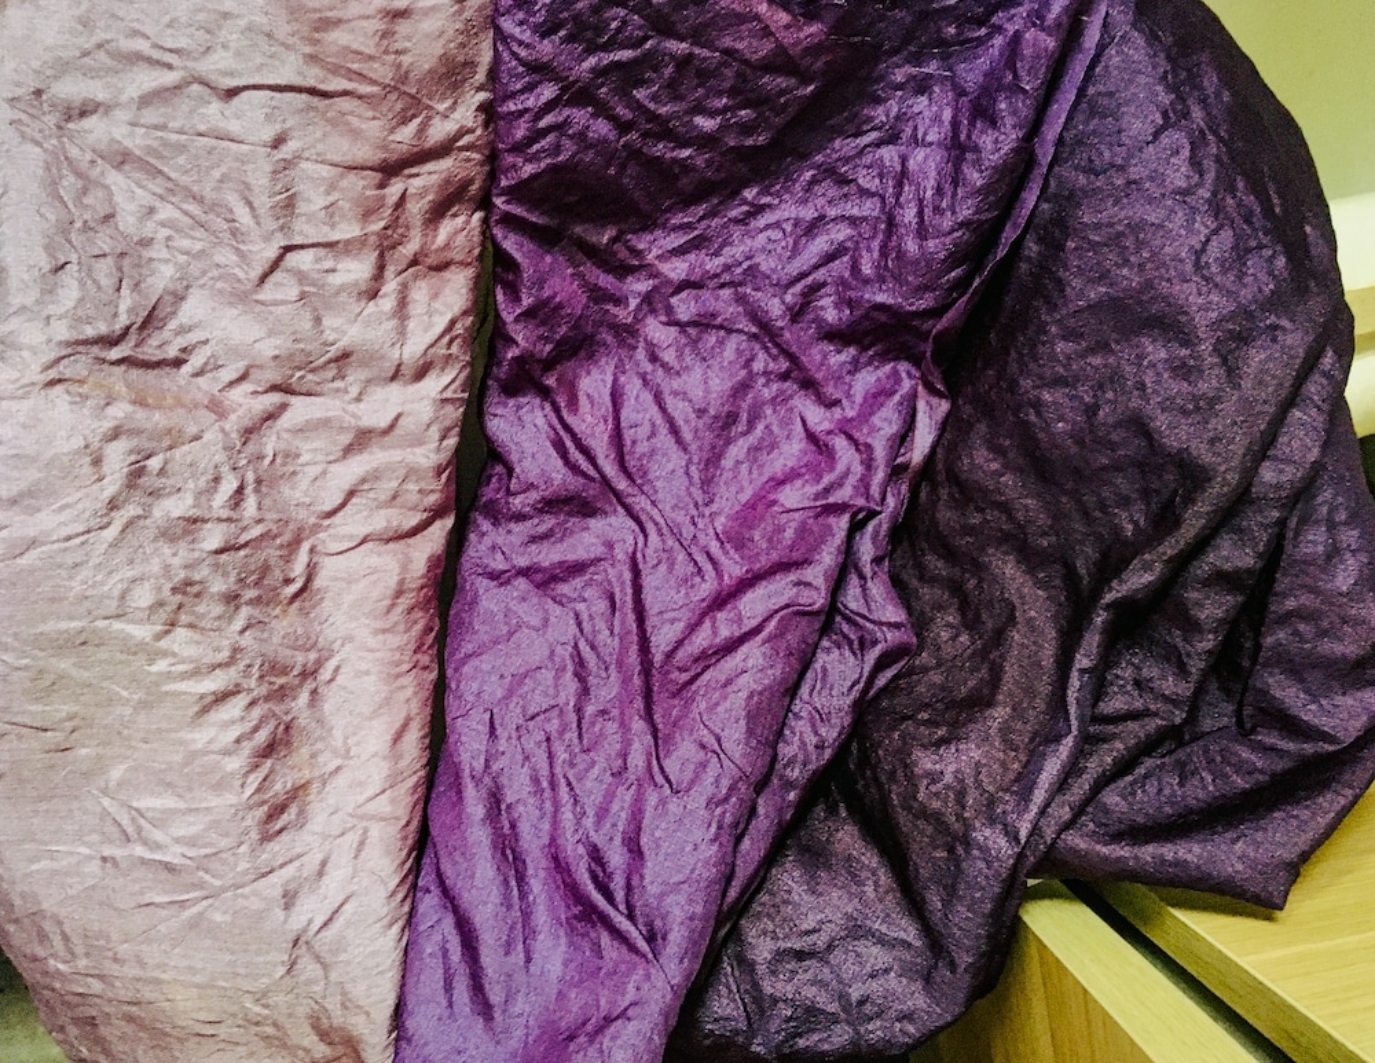 A close up look of the hand dyed materials used to construct the flowers for the Dream Puppet. Wrinkles silk that is dark purple, mainly, with some lighter lavender shade to the left of the frame.